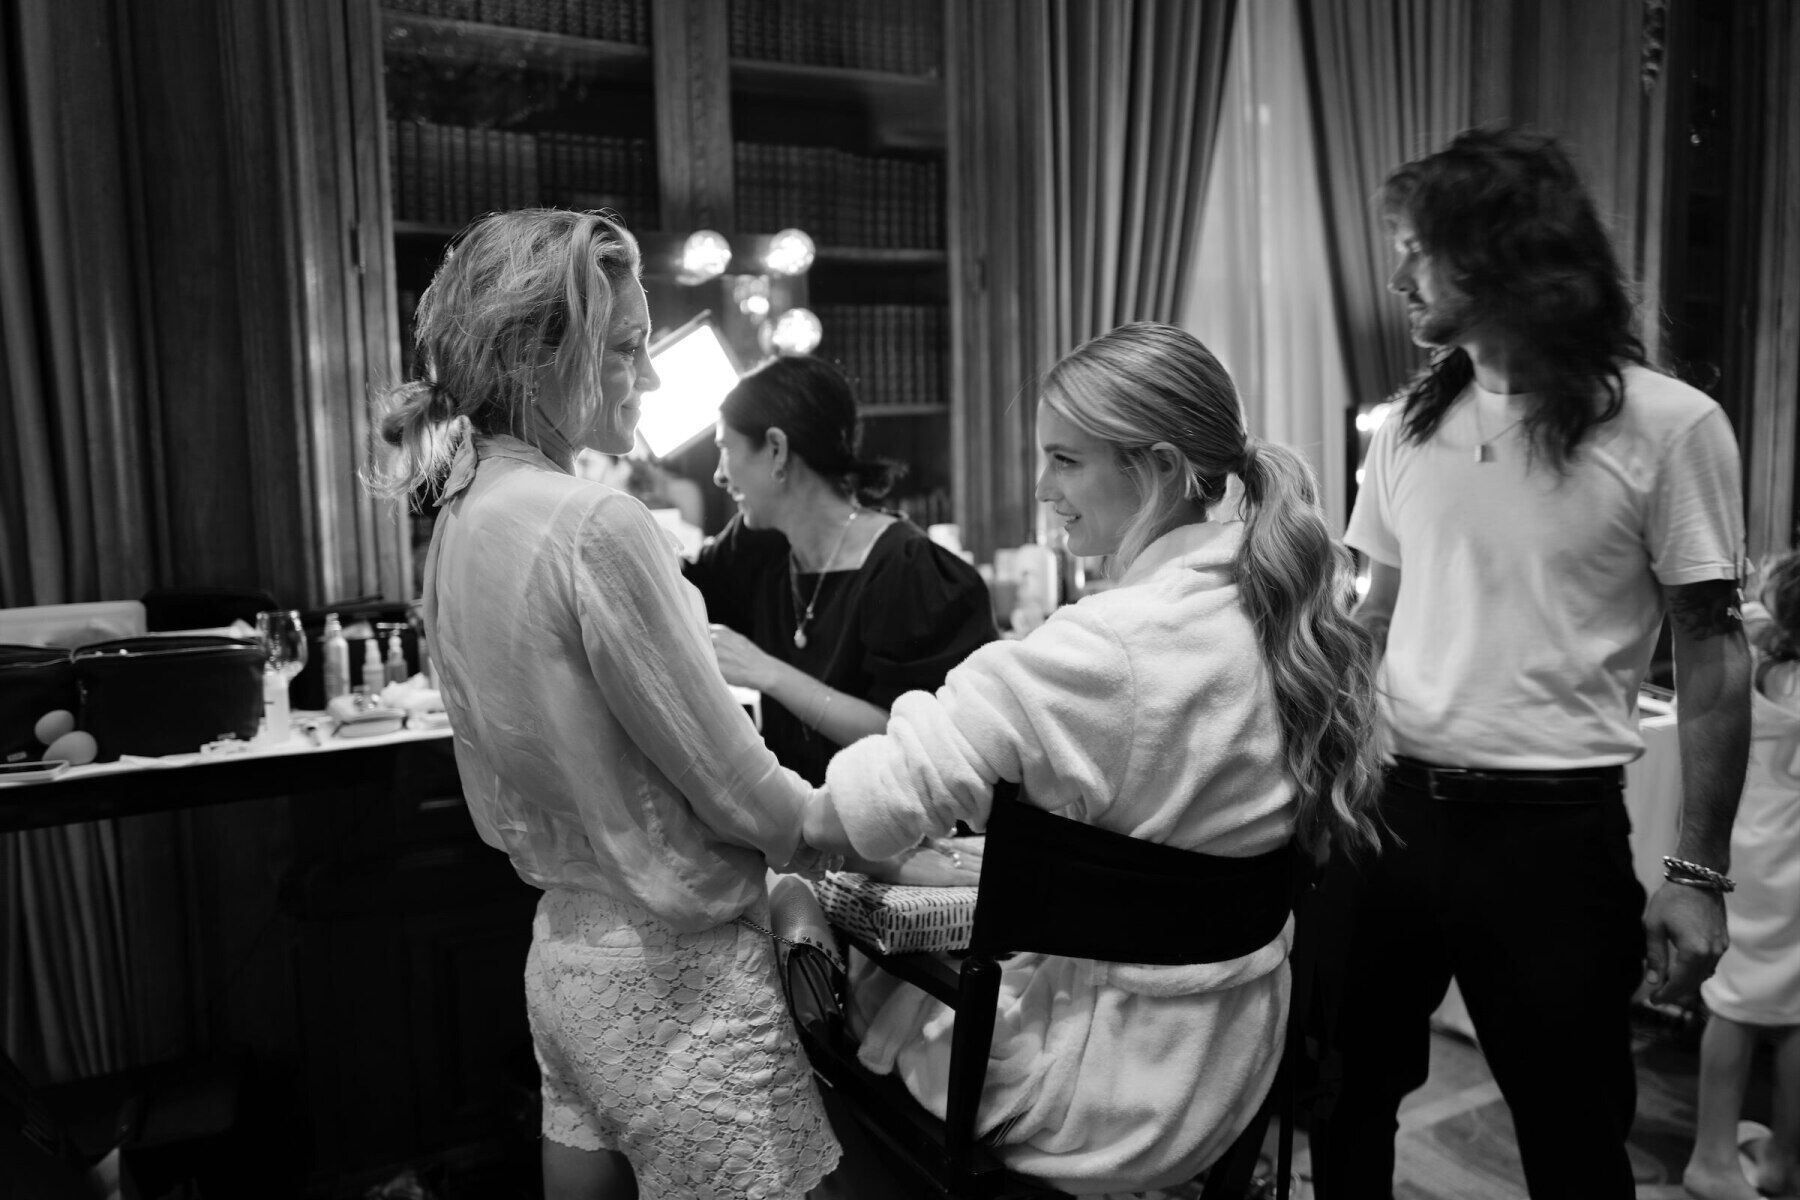 Kate Bock Kevin Love Wedding: Model Kate Bock getting her makeup done on her wedding day at The St. Regis in New York City.